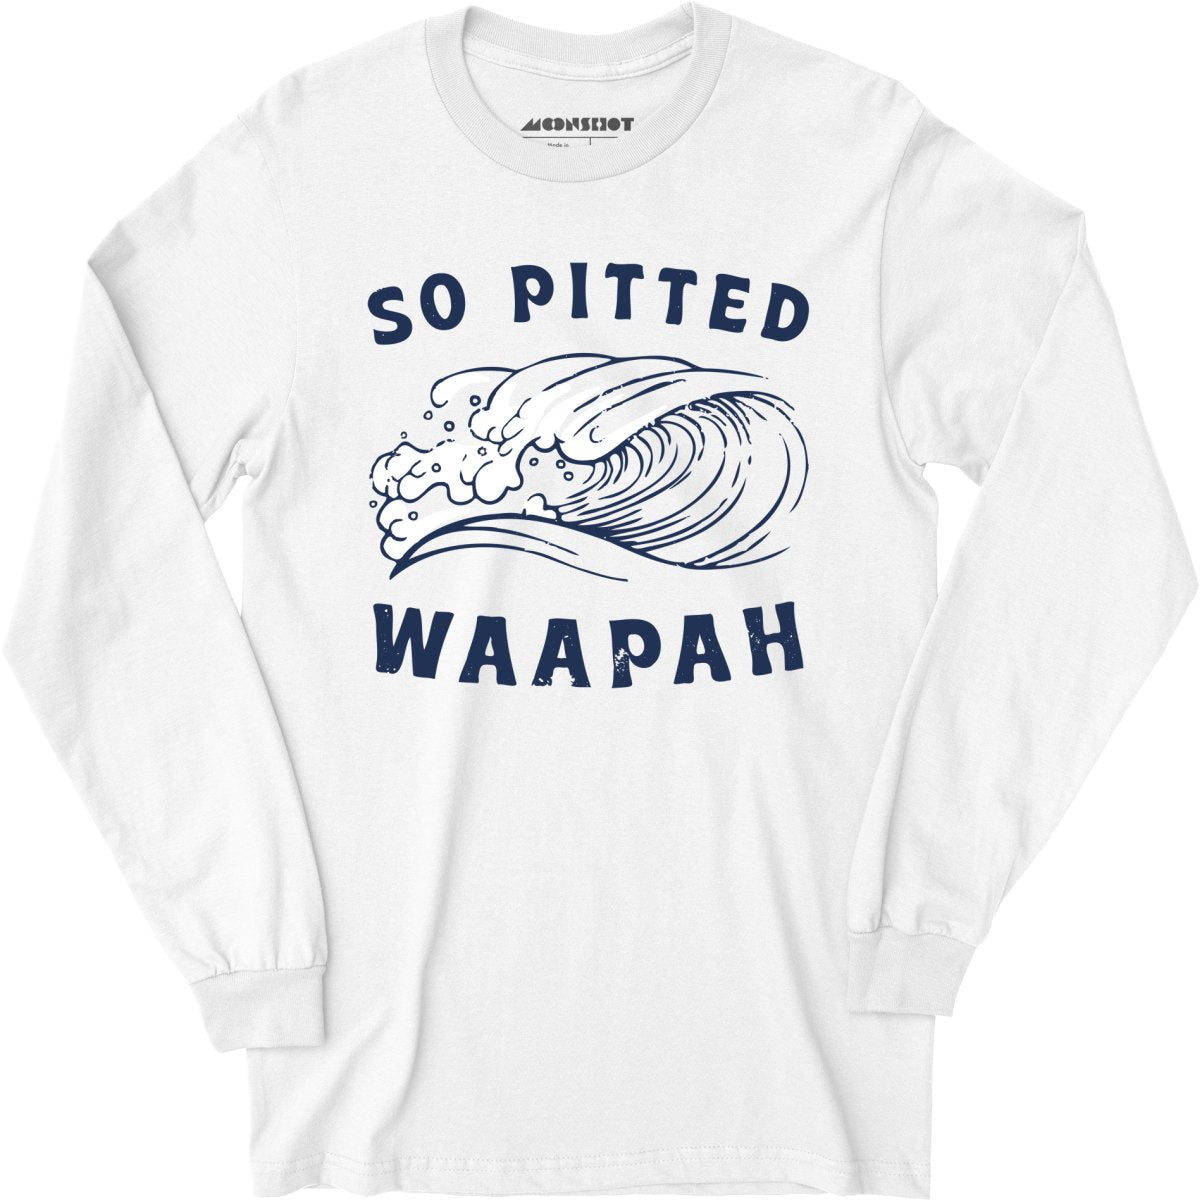 So Pitted - Long Sleeve T-Shirt